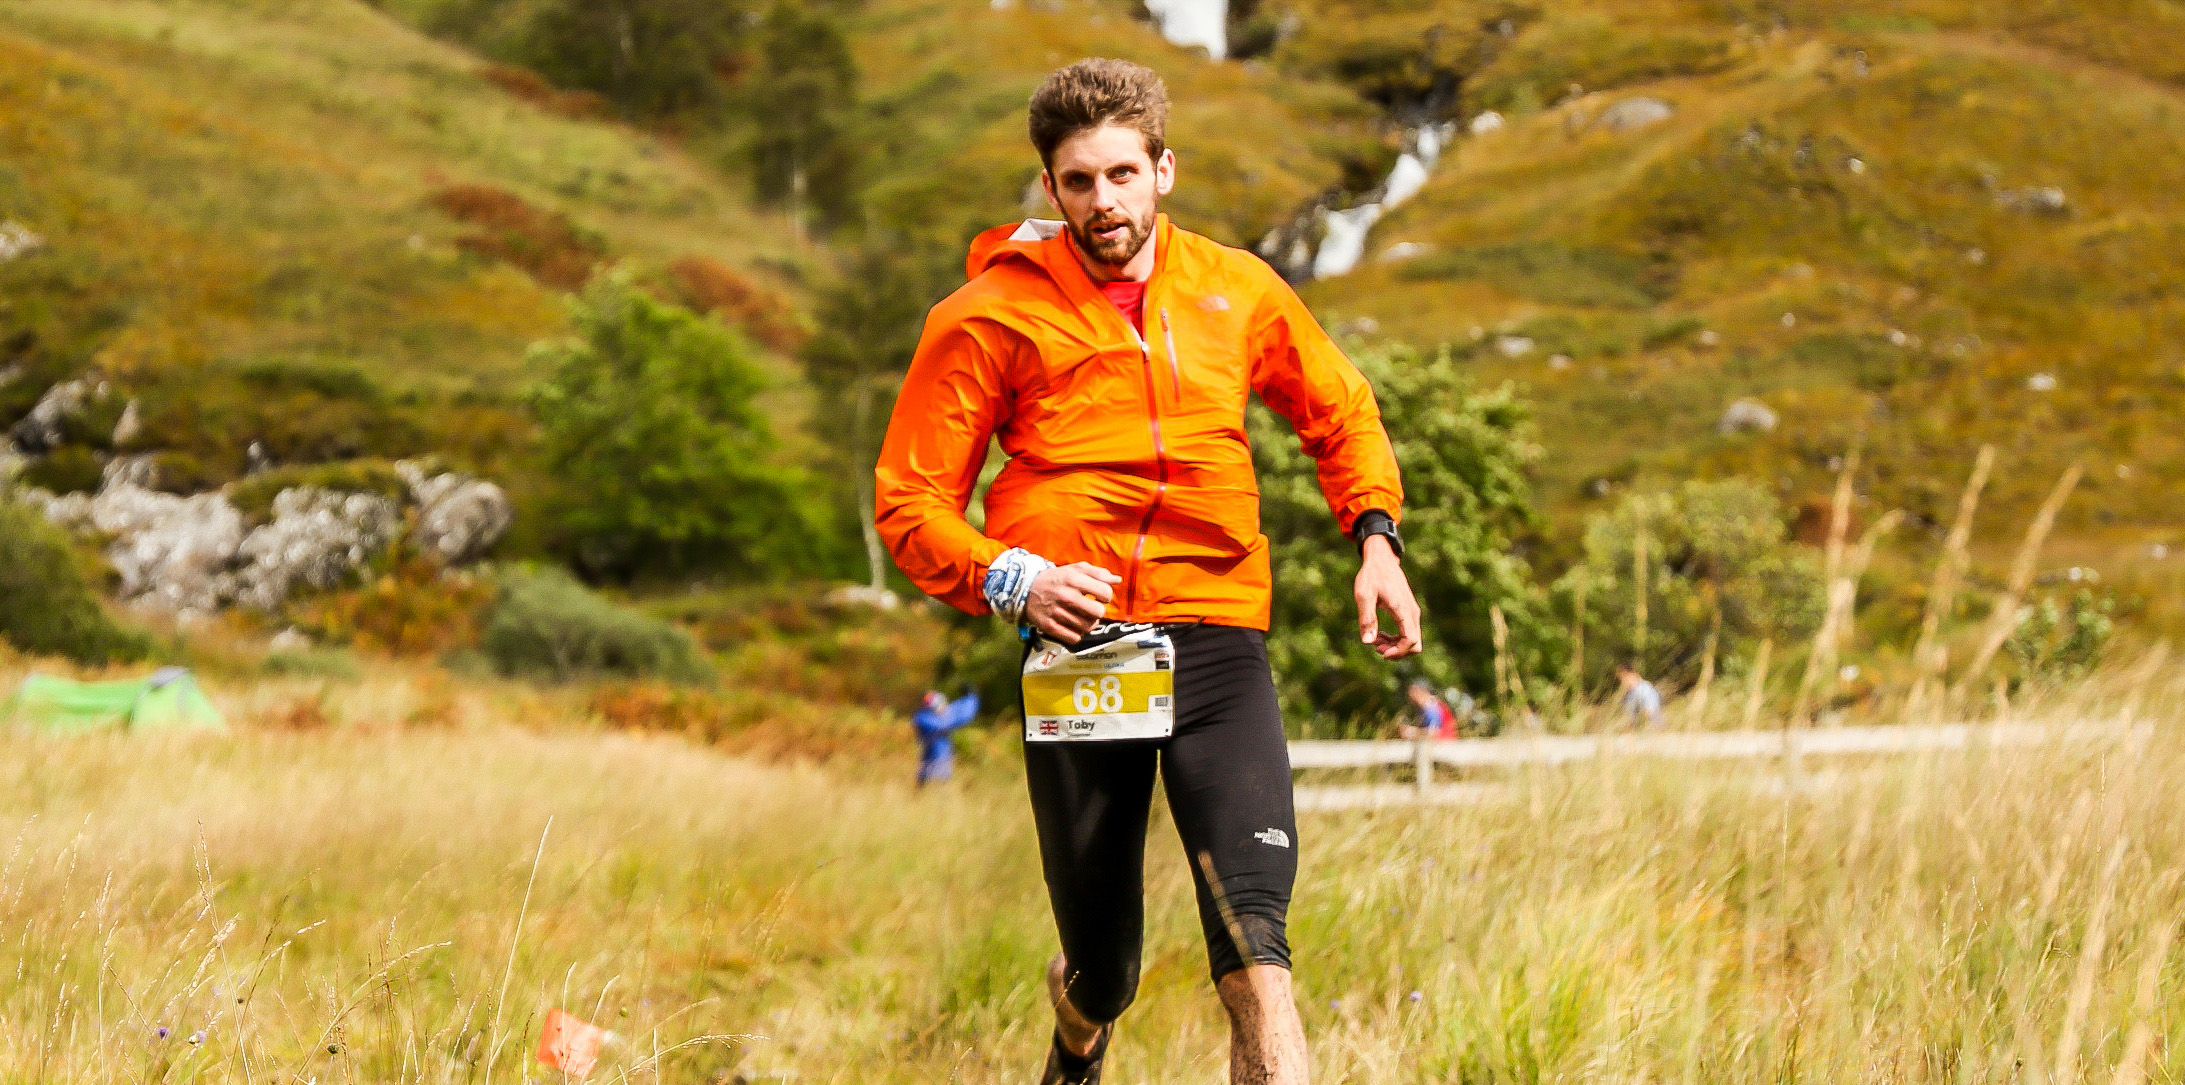 Toby Chapman in the Skyrunning World Champs Ultra